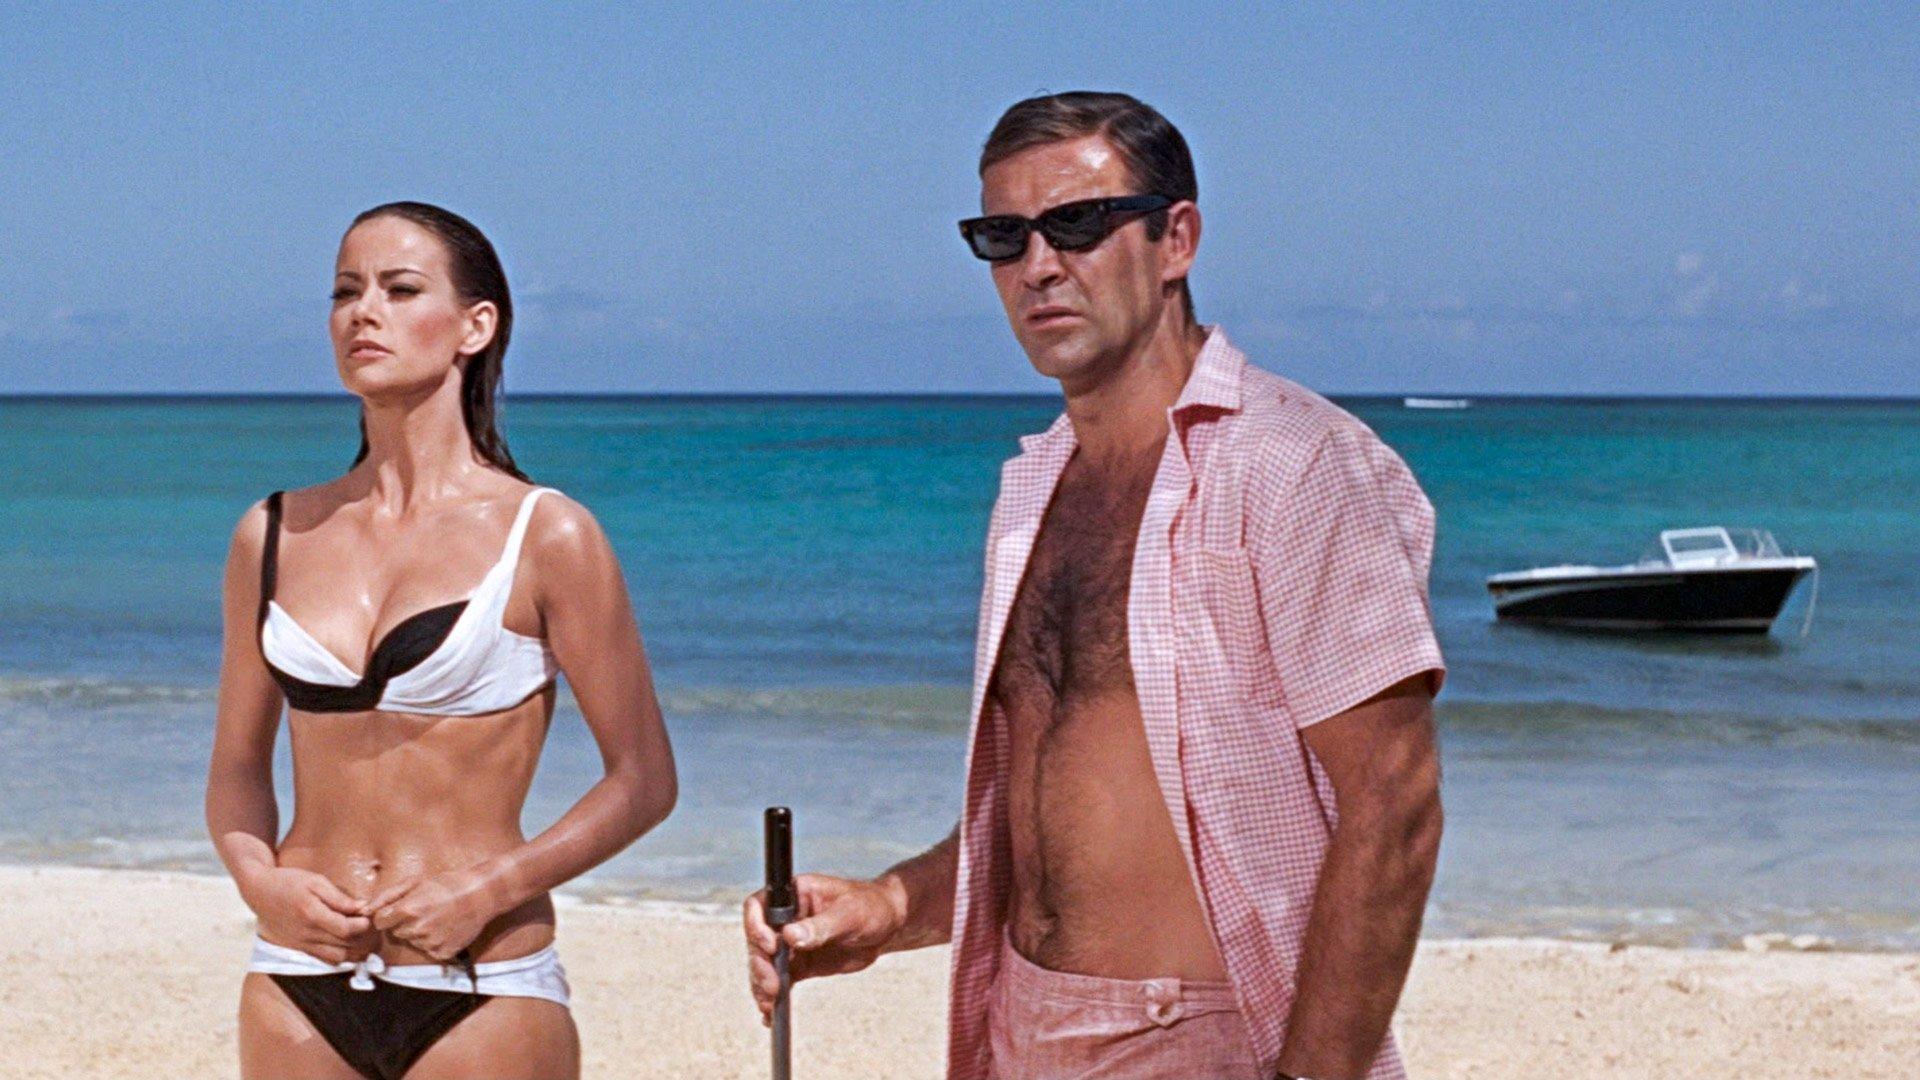 Sean connery and Claudine Auger in "Thunderball" (1965)